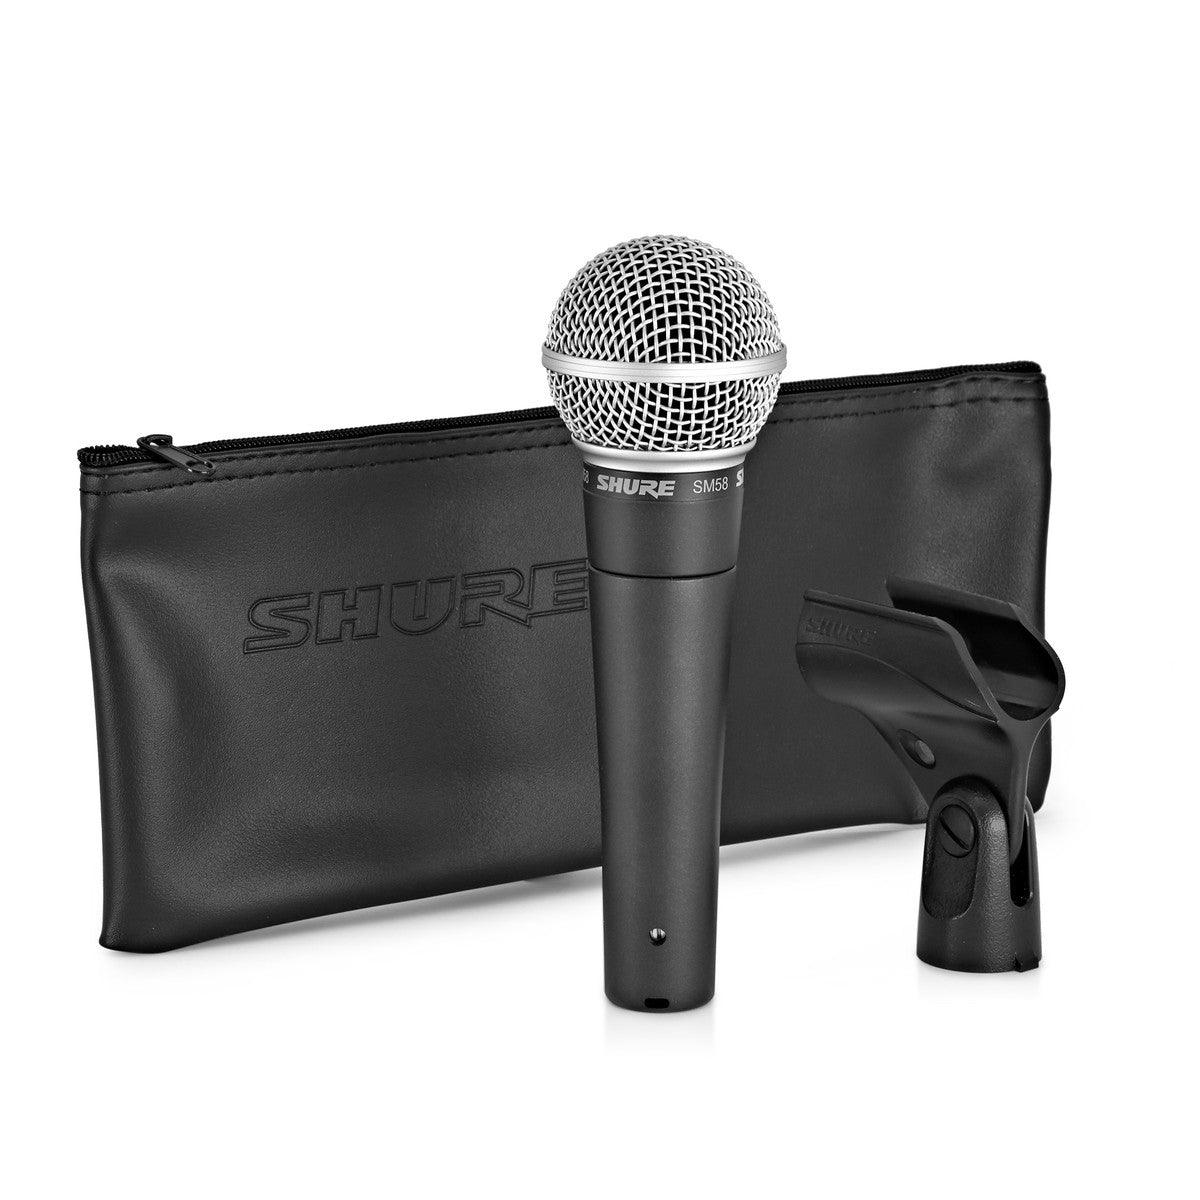 SHURE SM58 Microphone - DY Pro Audio